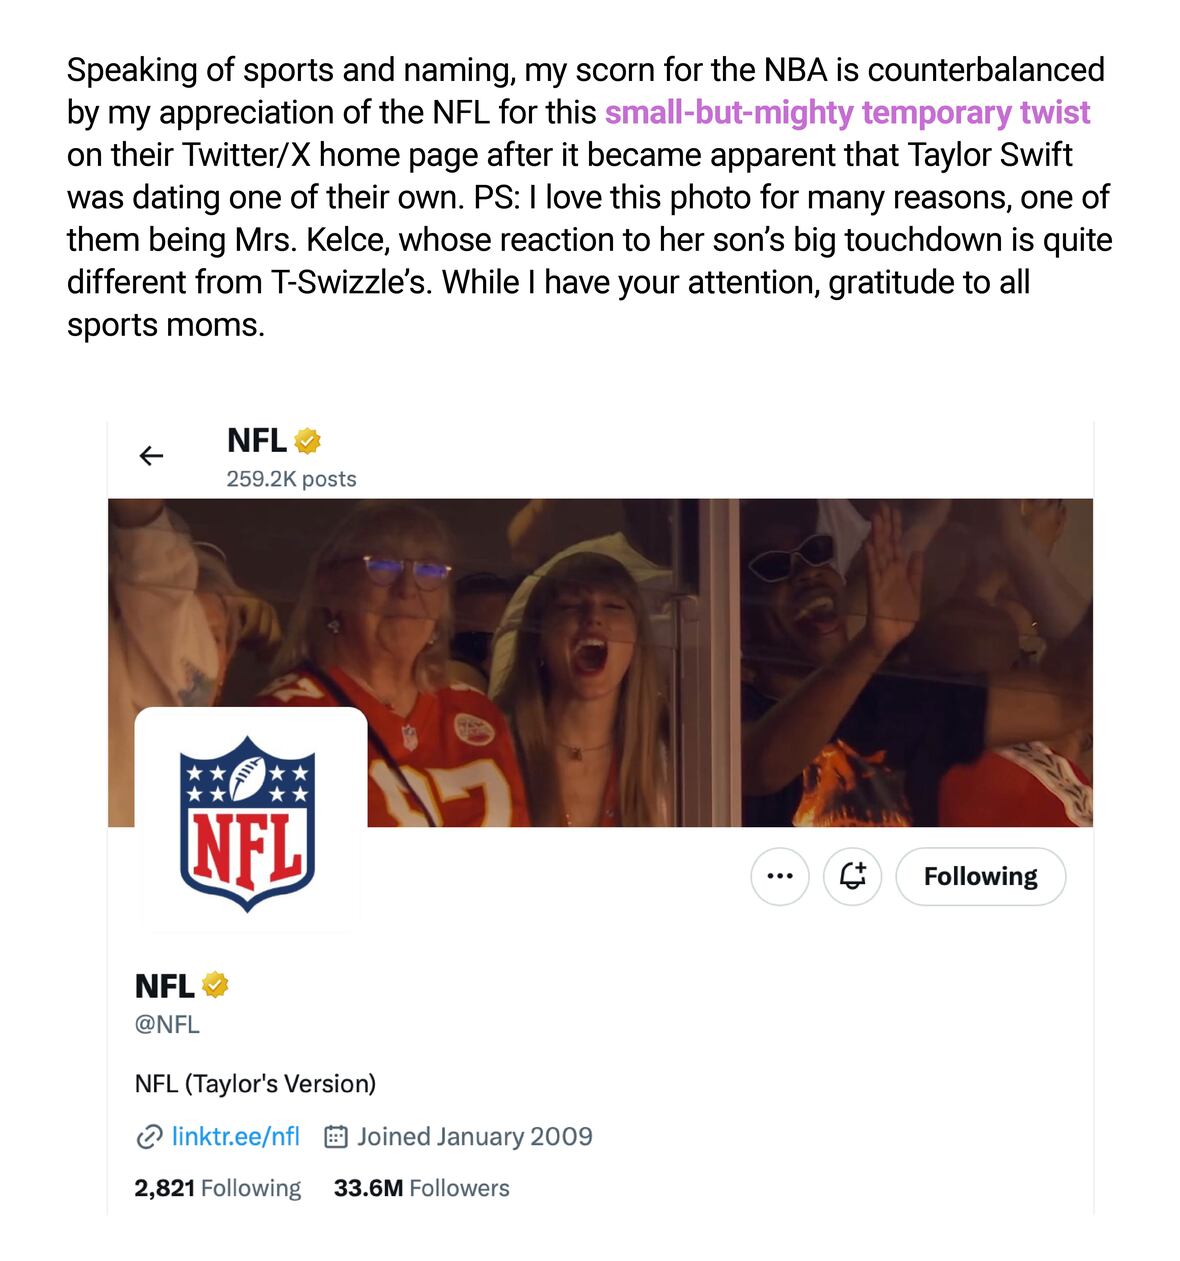 Speaking of sports and naming, my scorn for the NBA is counterbalanced by my appreciation of the NFL for this small-but-mighty temporary twist on their Twitter/X home page after it became apparent that Taylor Swift was dating one of their own. PS: I love this photo for many reasons, one of them being Mrs. Kelce, whose reaction to her son's big touchdown is quite different from T-Swizzle's. While I have your attention, gratitude to all sports moms.